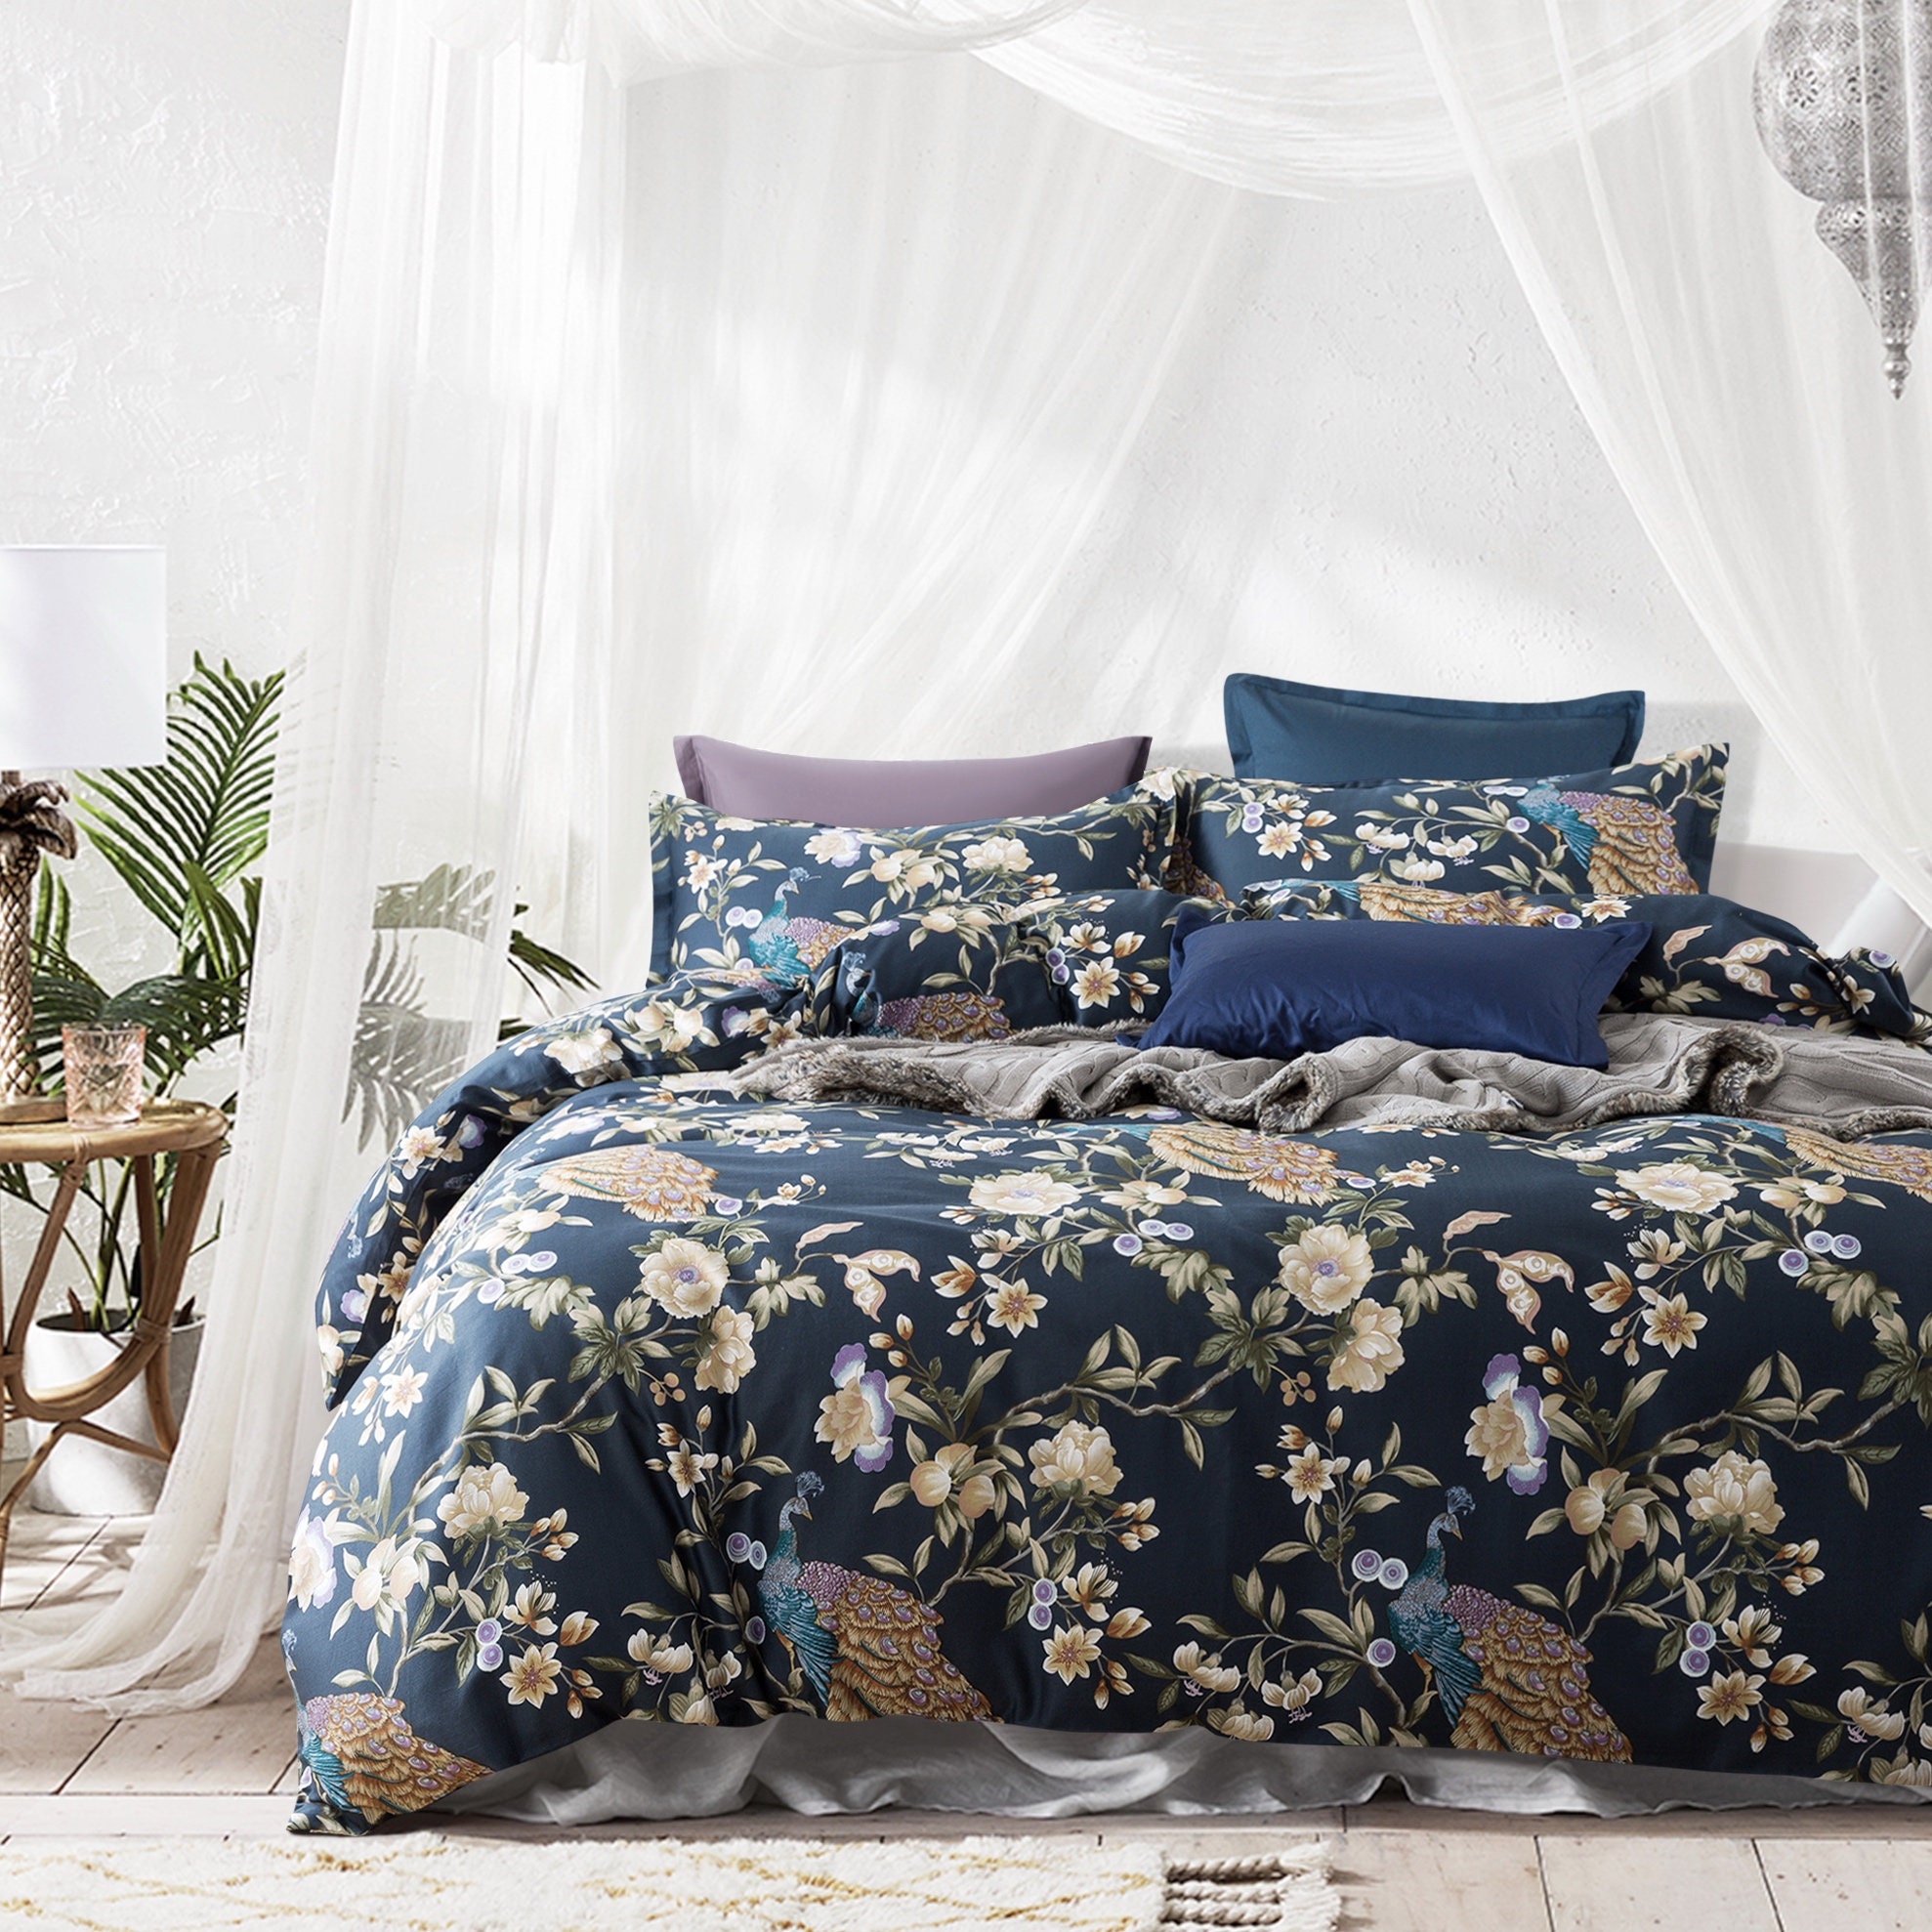 Chinoiserie Bedding - Etsy